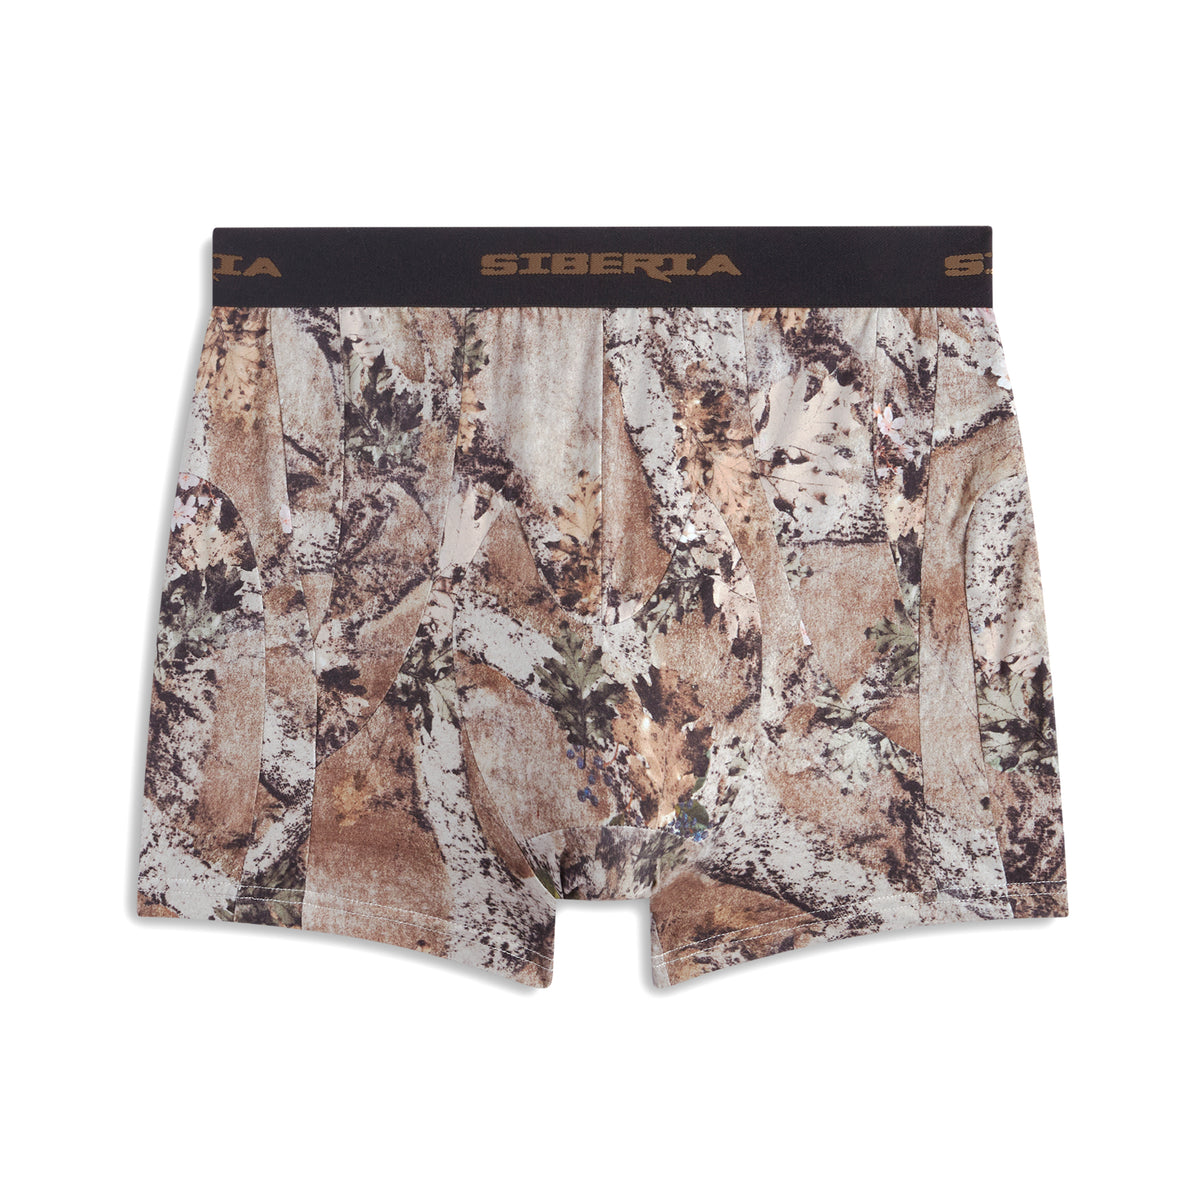 MOTO BOXERS (2 PACK) - SNOW/EARTH REAL TREE